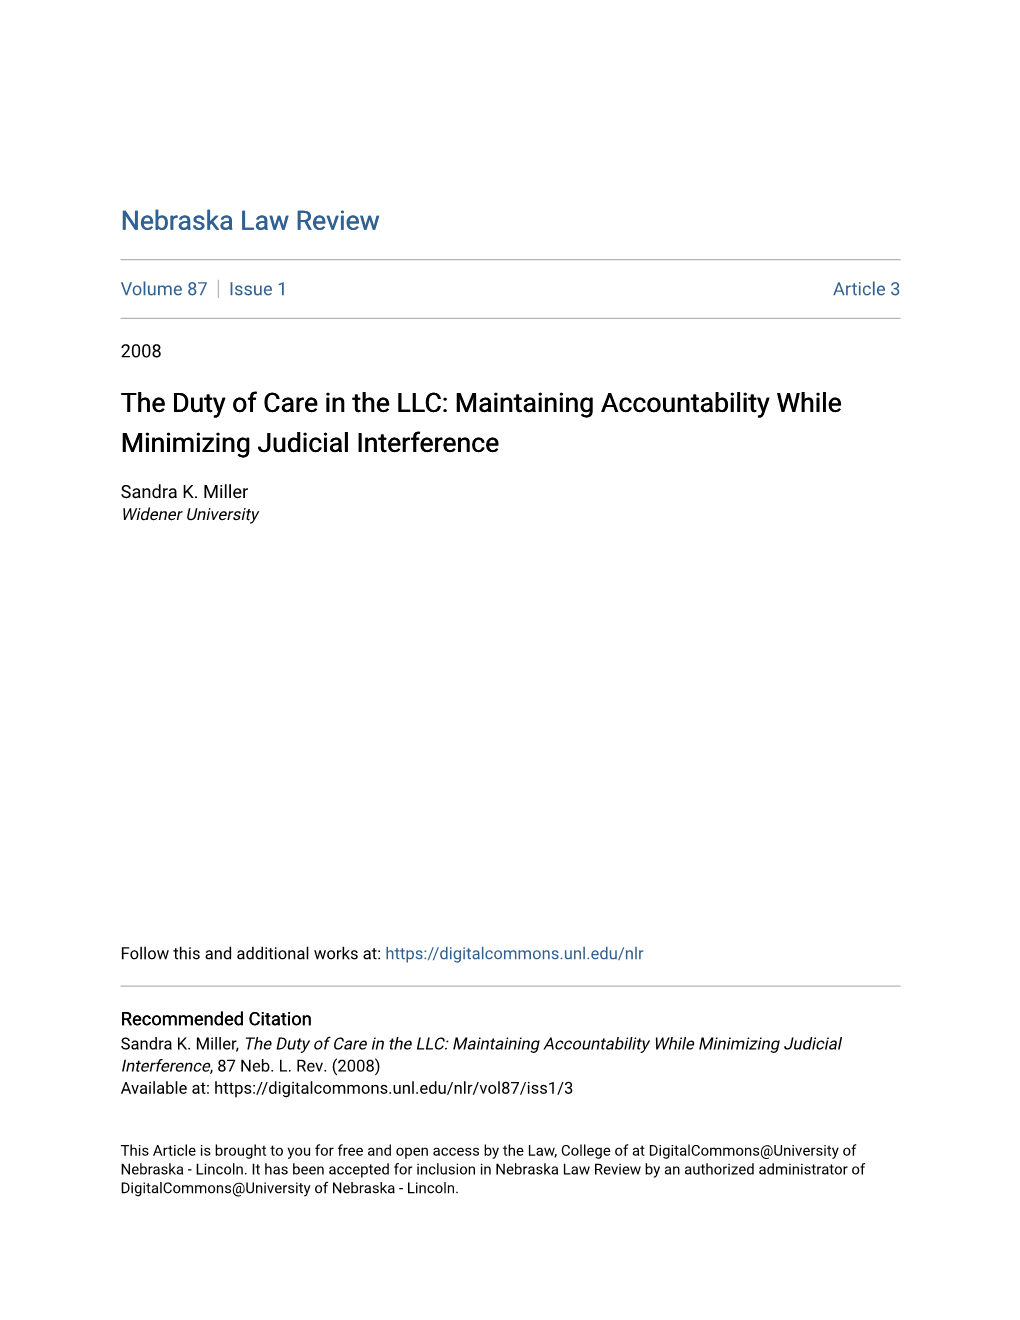 The Duty of Care in the LLC: Maintaining Accountability While Minimizing Judicial Interference